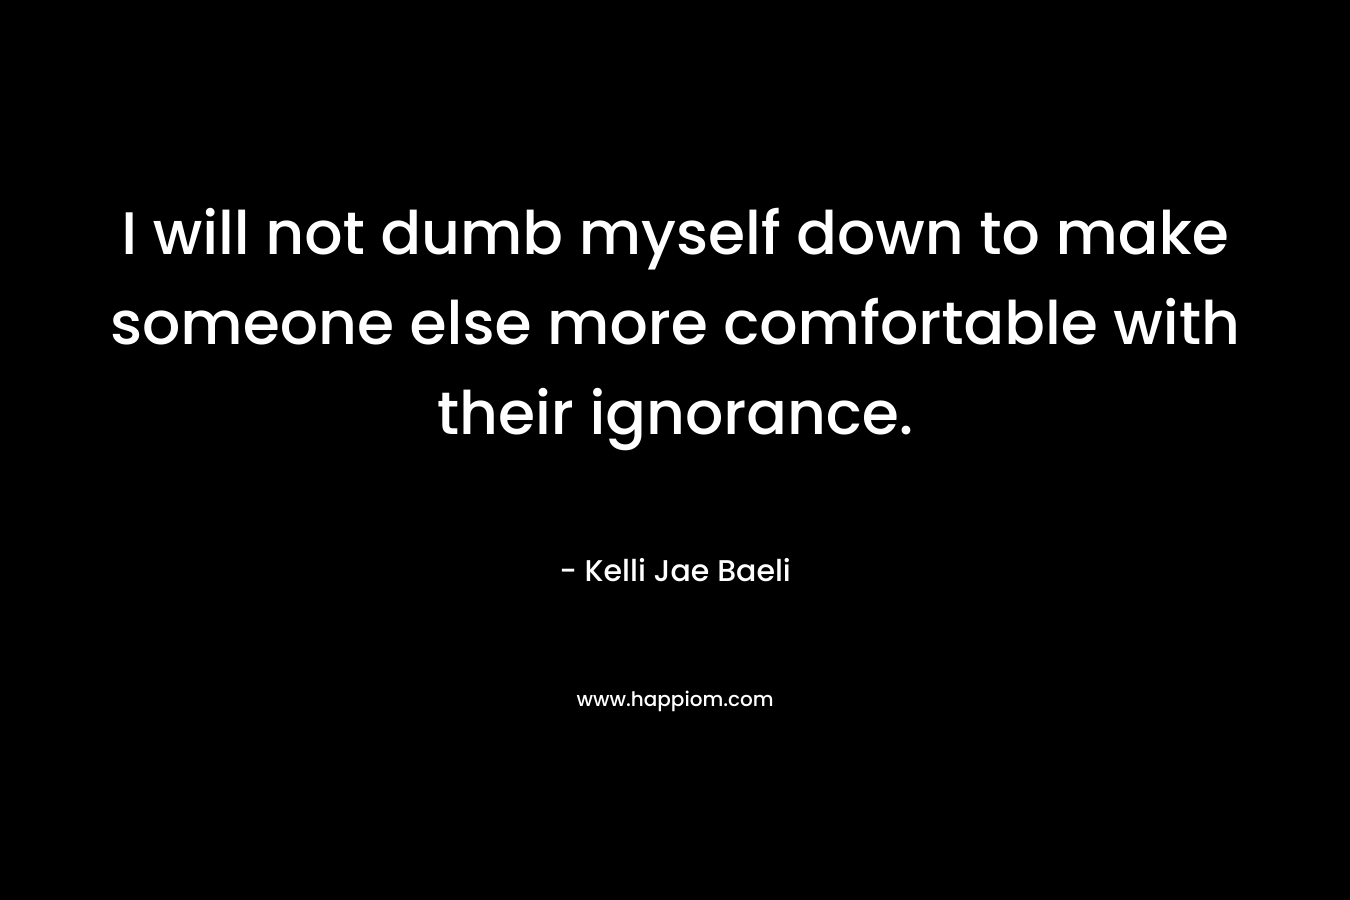 I will not dumb myself down to make someone else more comfortable with their ignorance.